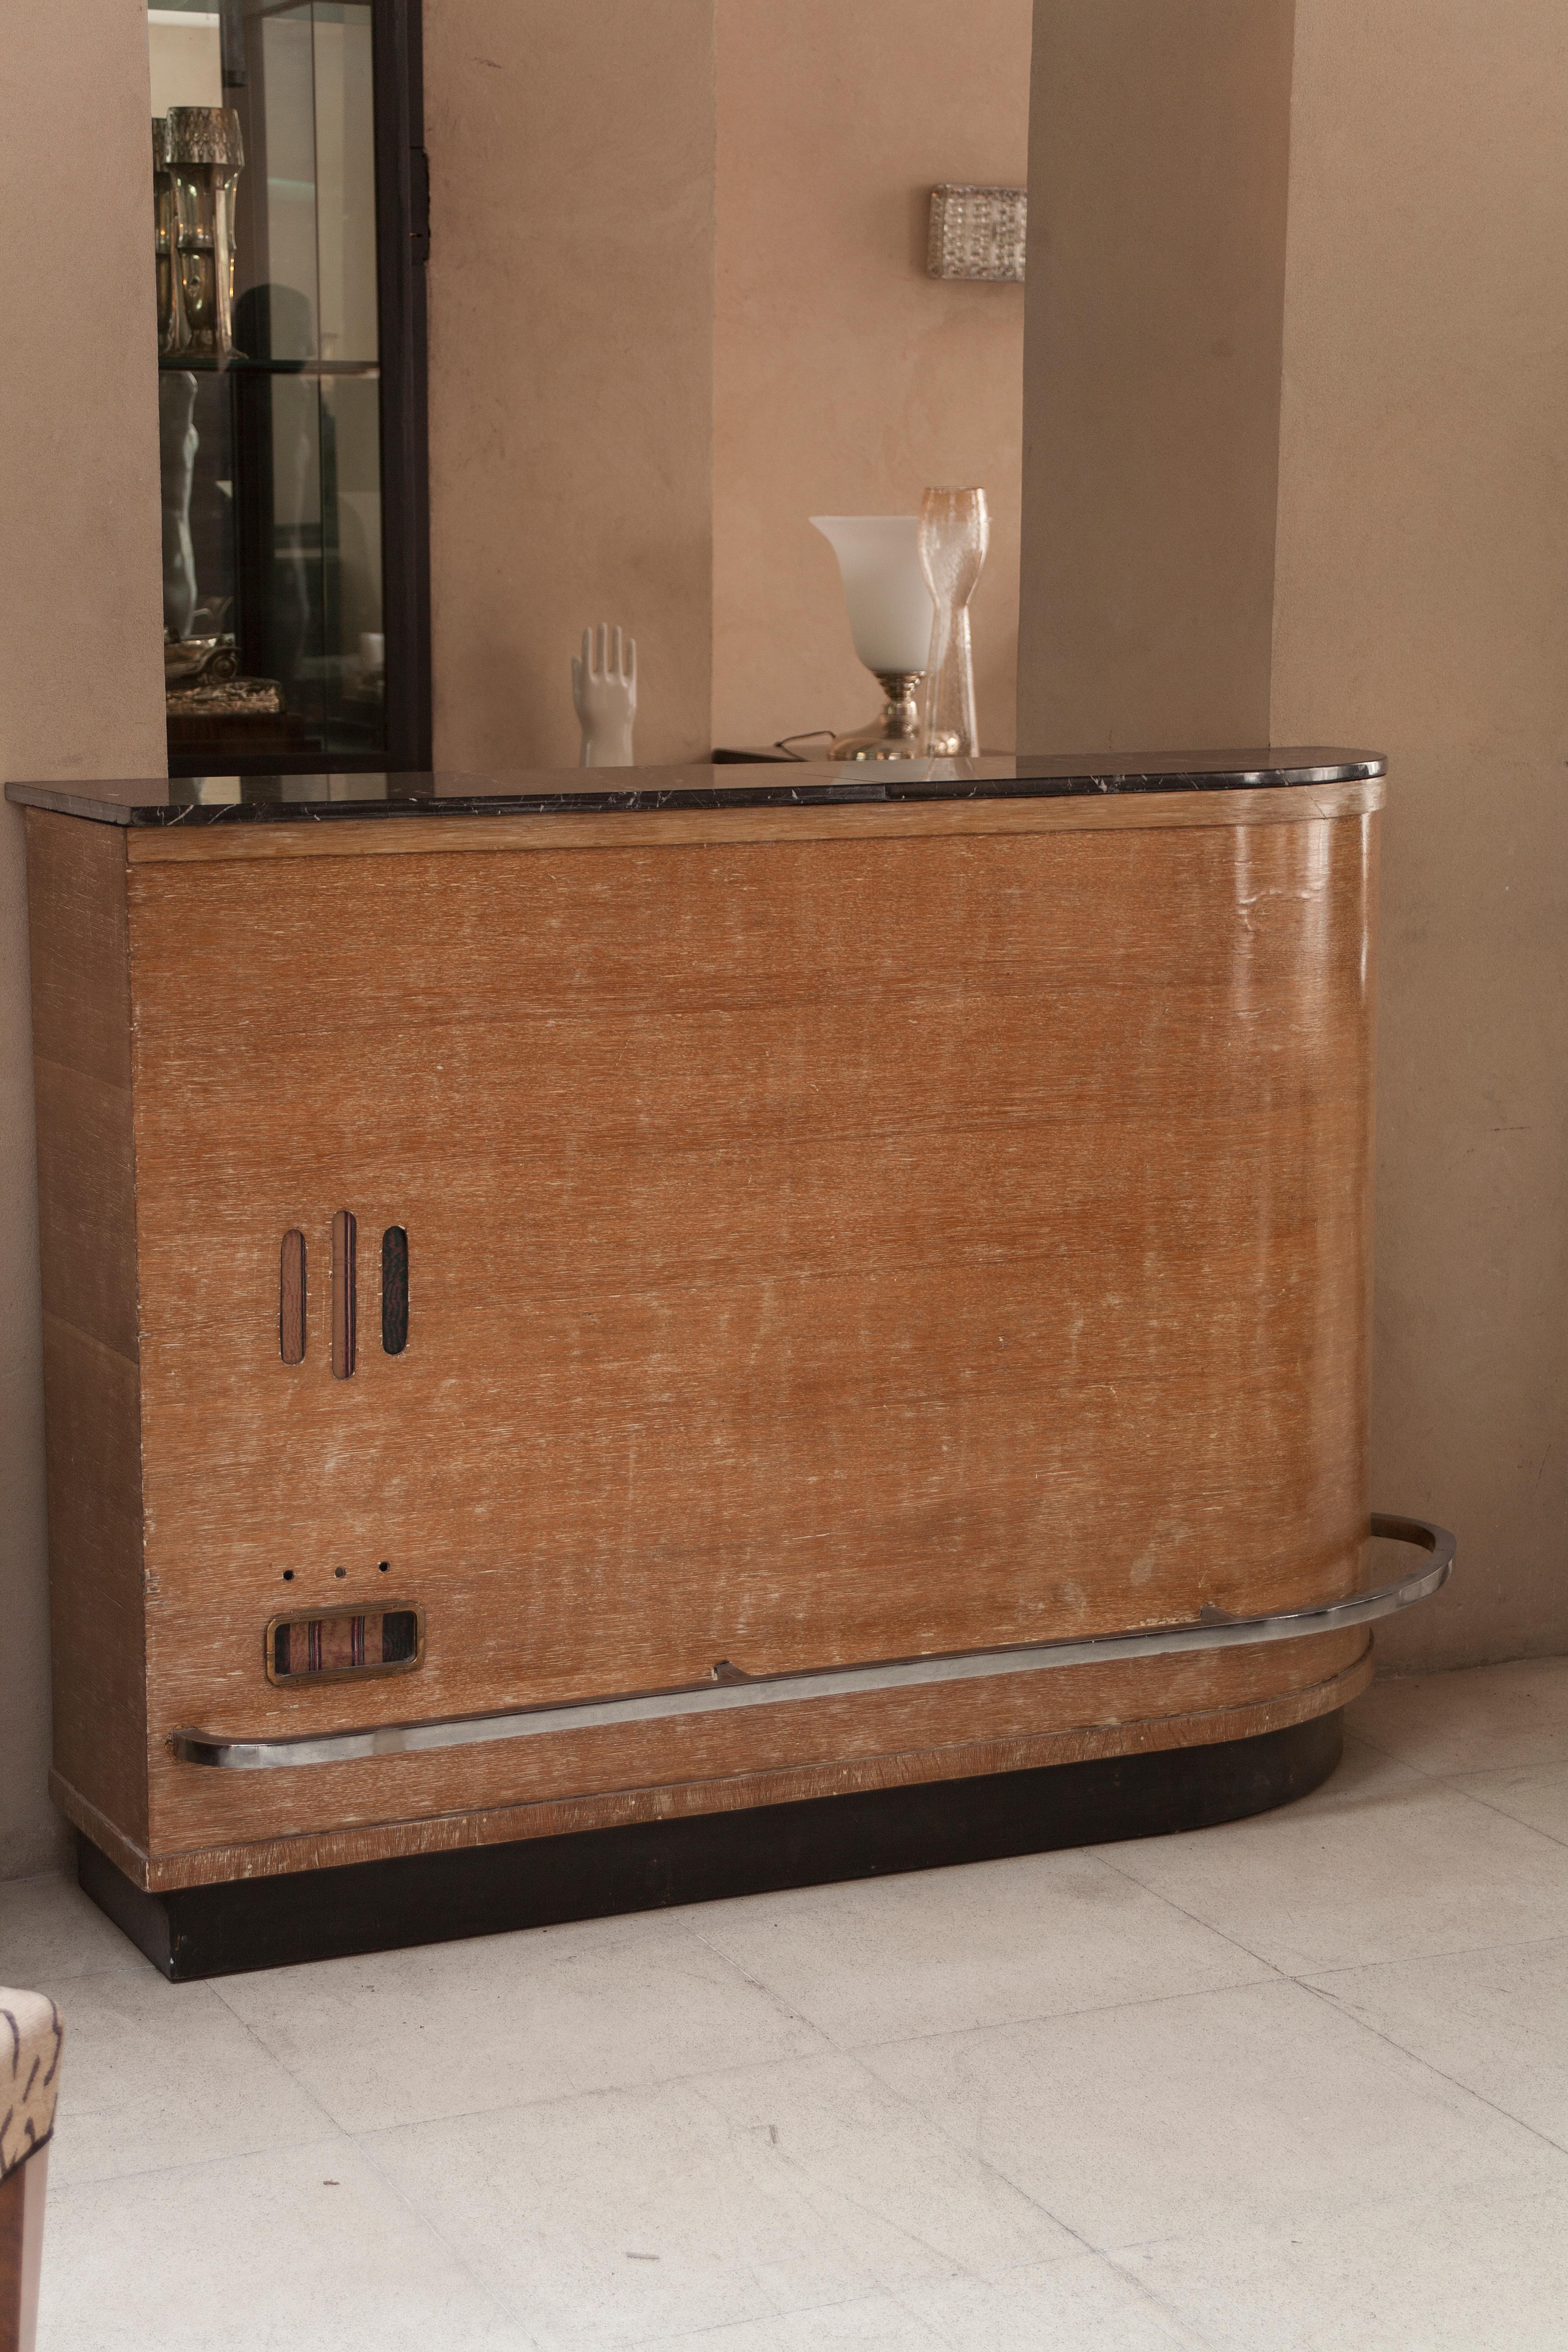 Amaizing bar 

Materials: marble, wood and chrome
Style: Art Deco
If you want to live in the golden years, this is the bar that your project needs.
We have specialized in the sale of Art Deco and Art Nouveau and Vintage styles since 1982. If you